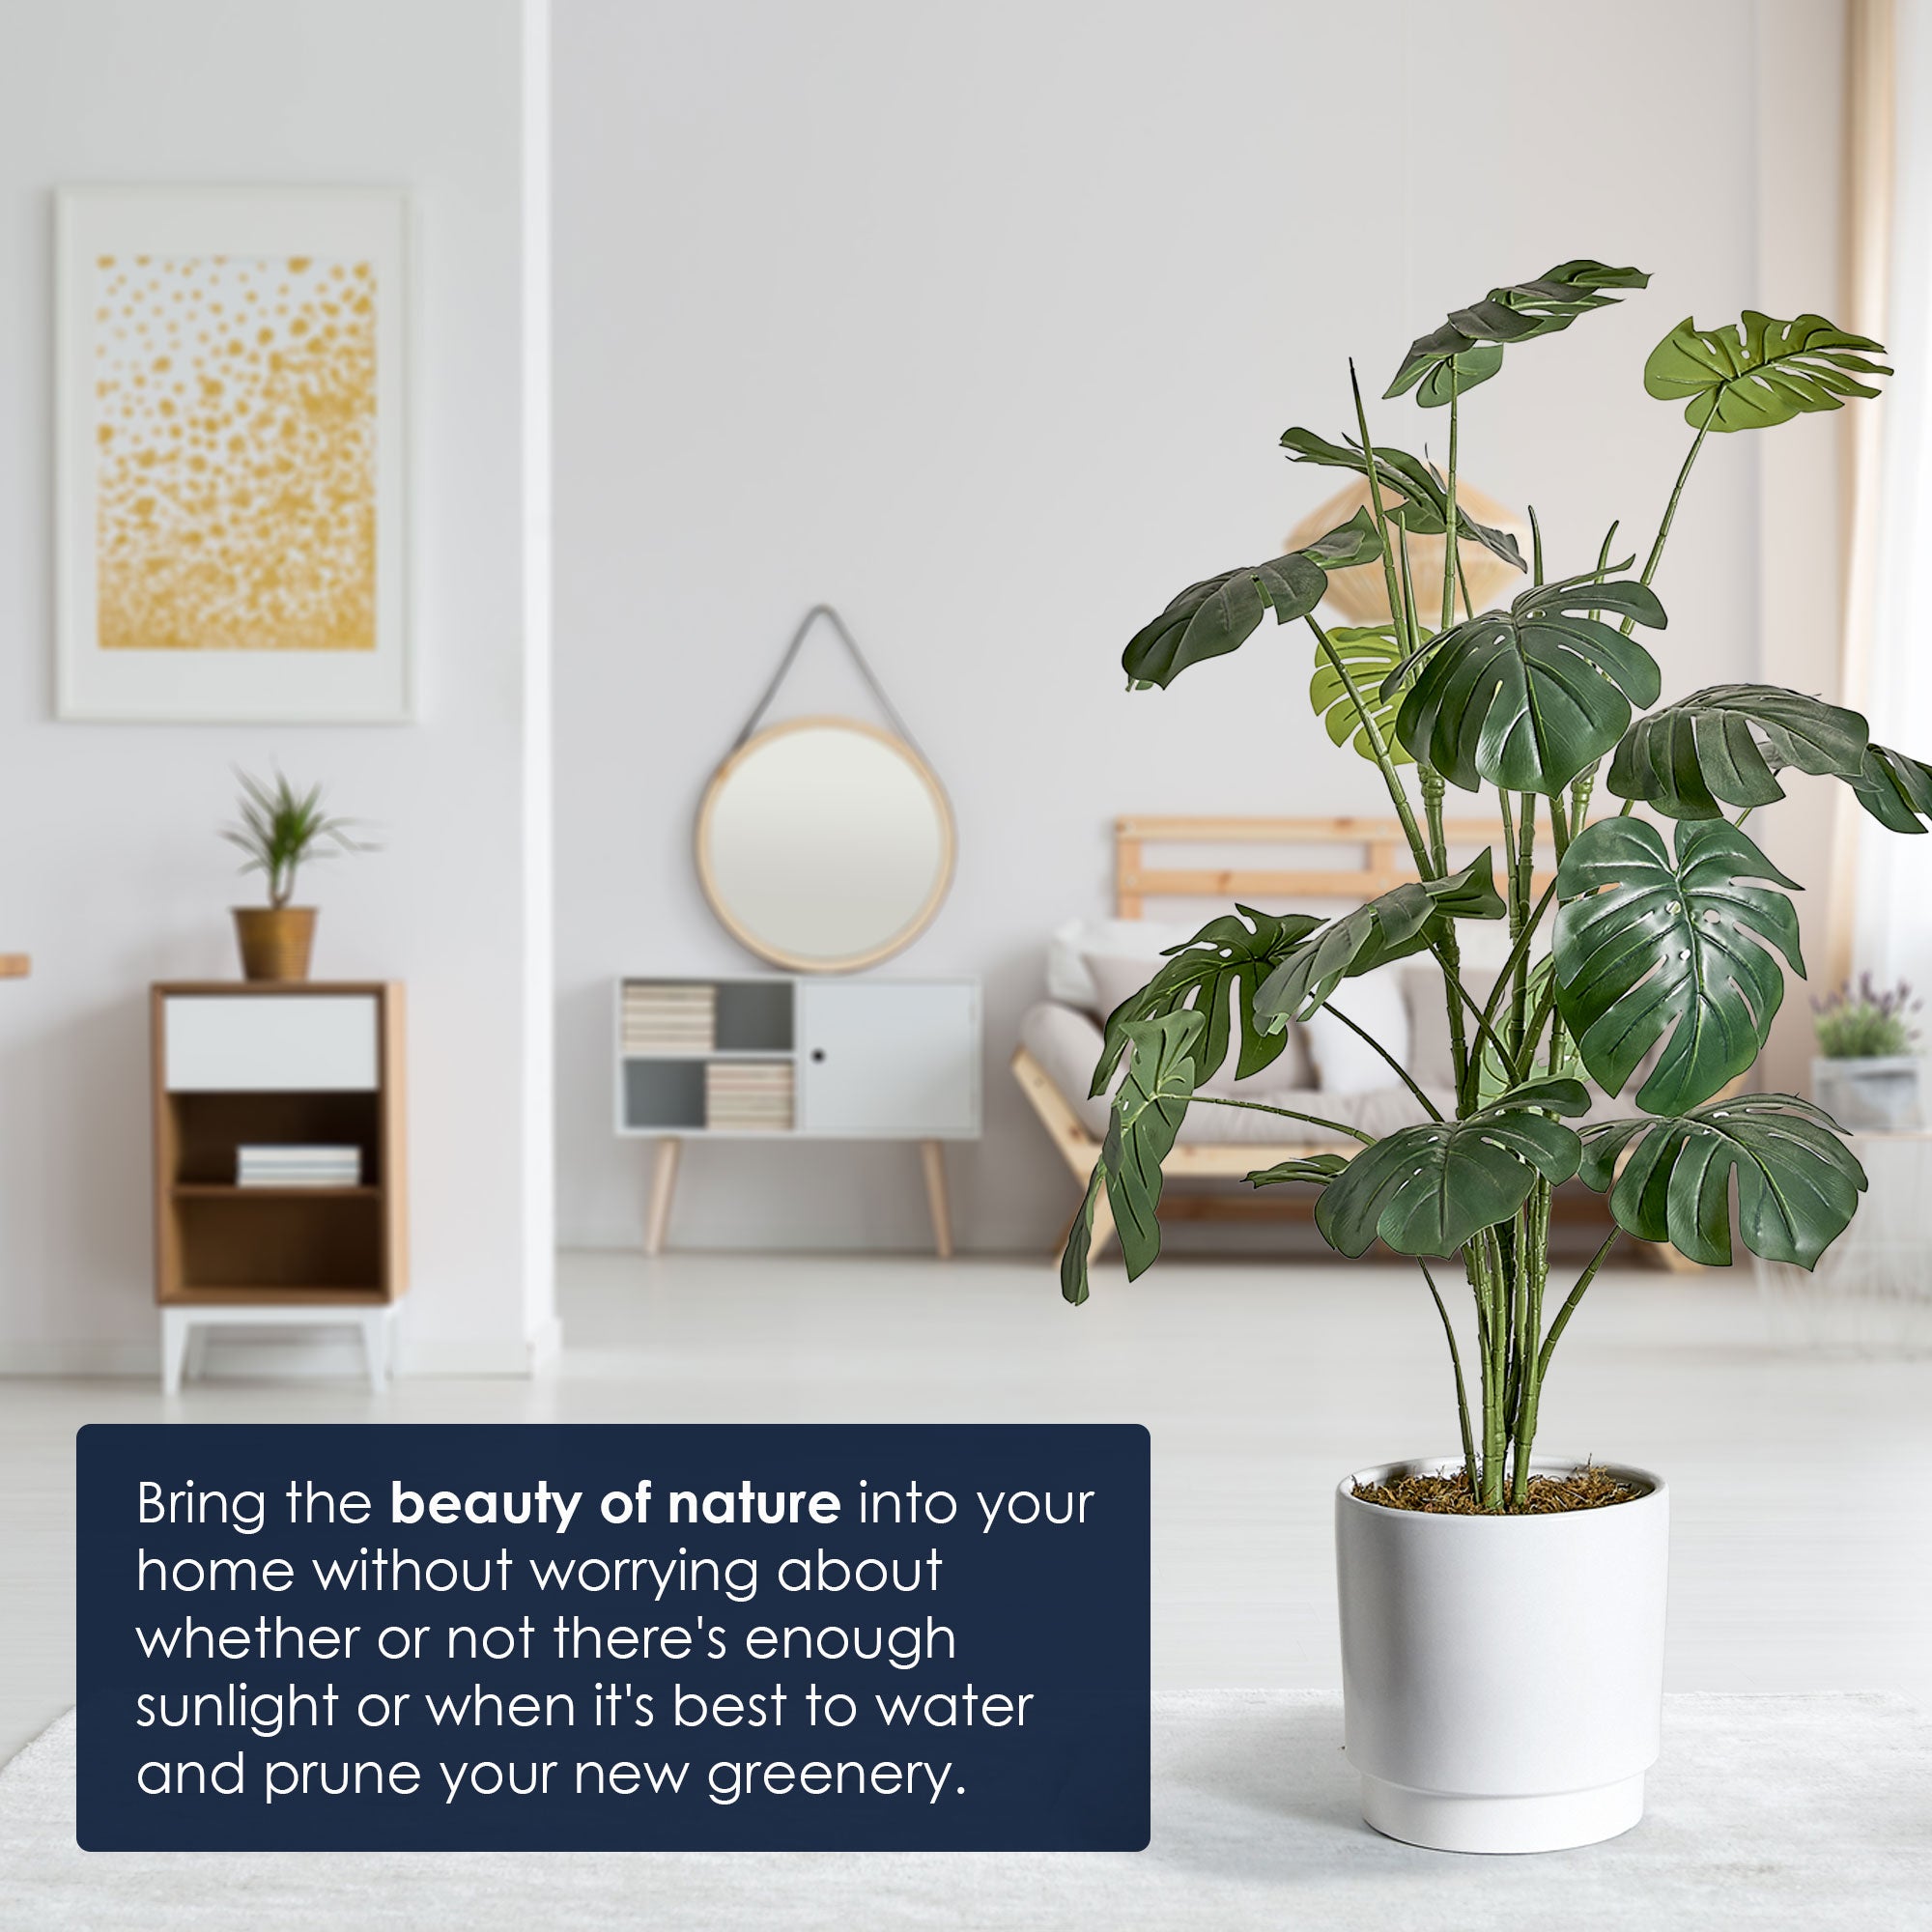 Artificial Monstera Tree in White Ceramic Pot with Pedestal - 48